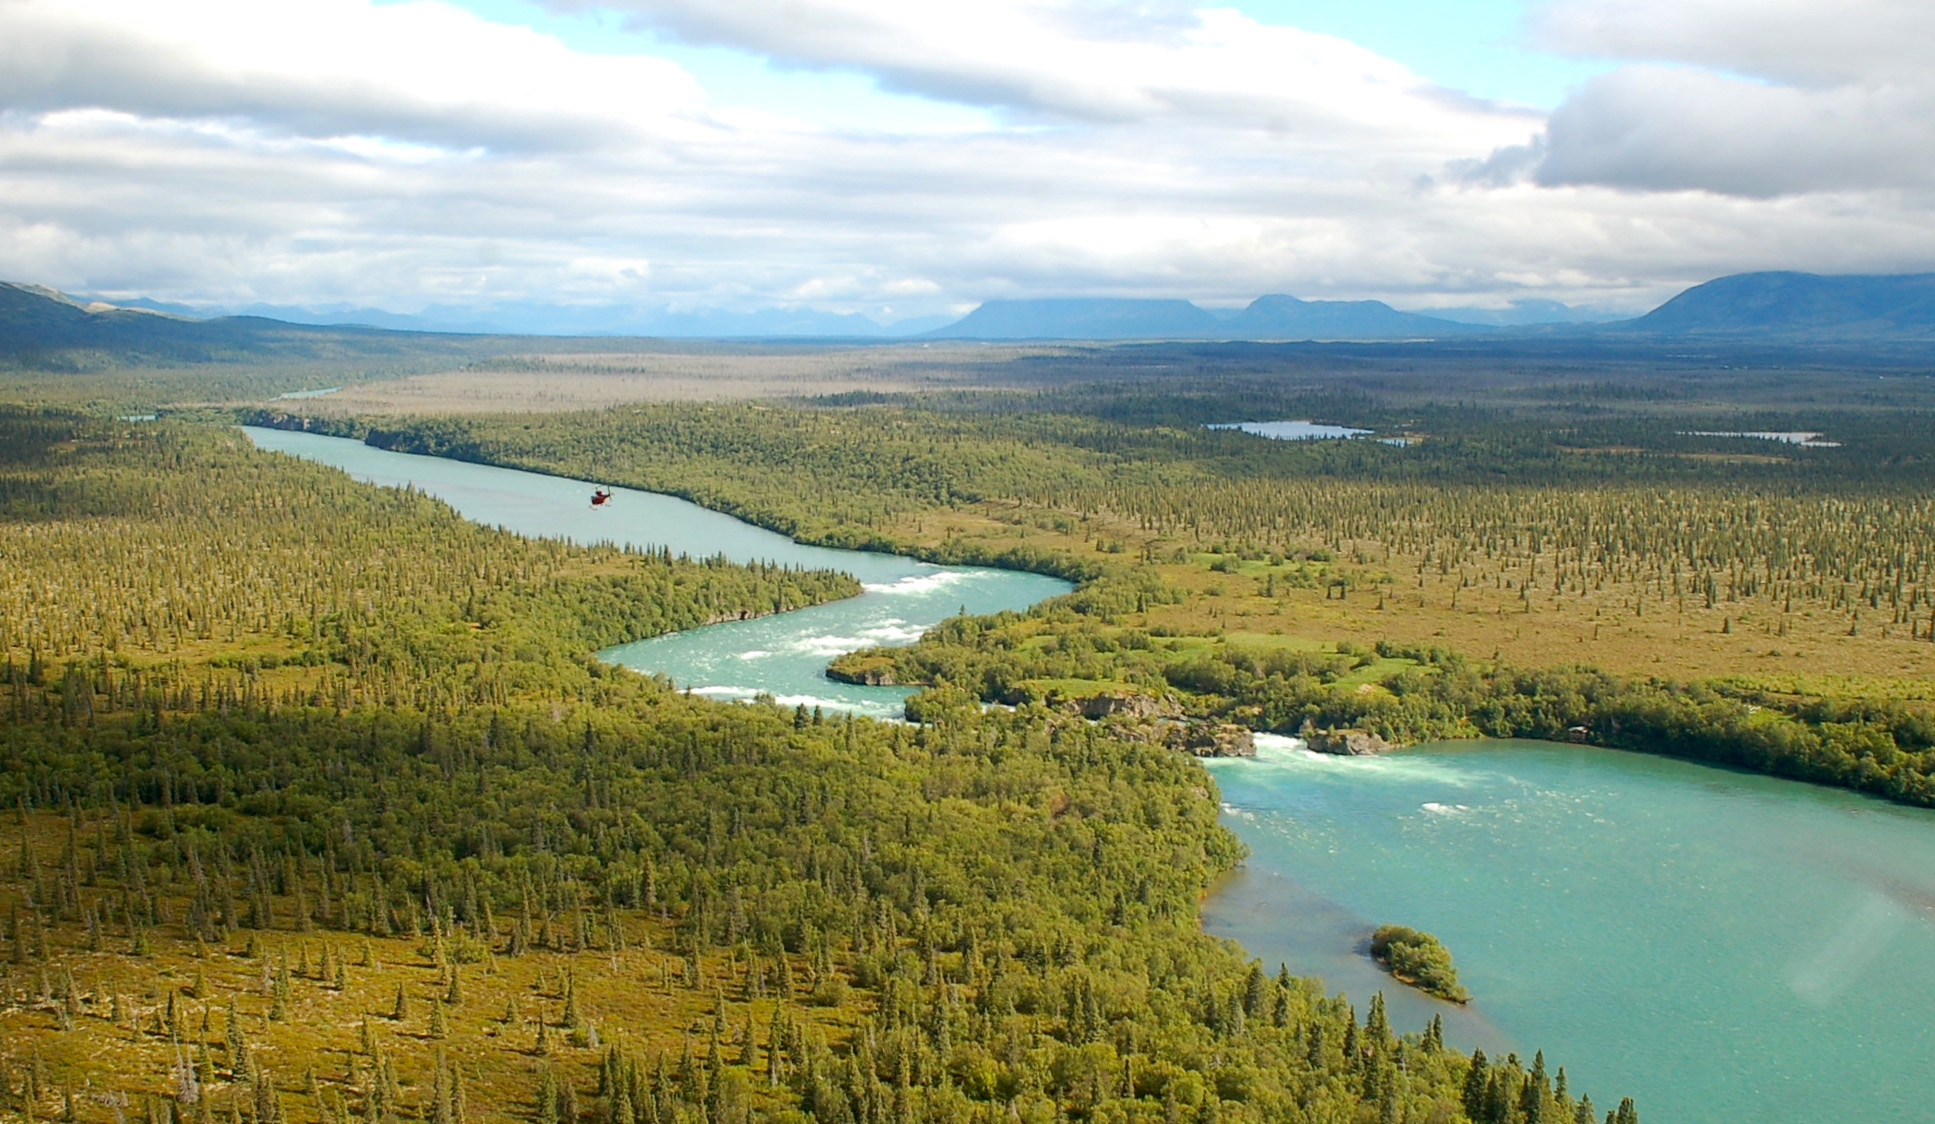 The Newhalen River runs within a few miles of the Pebble Mine site near Lake Clark National Park and Preserve. (Michael Conathan)